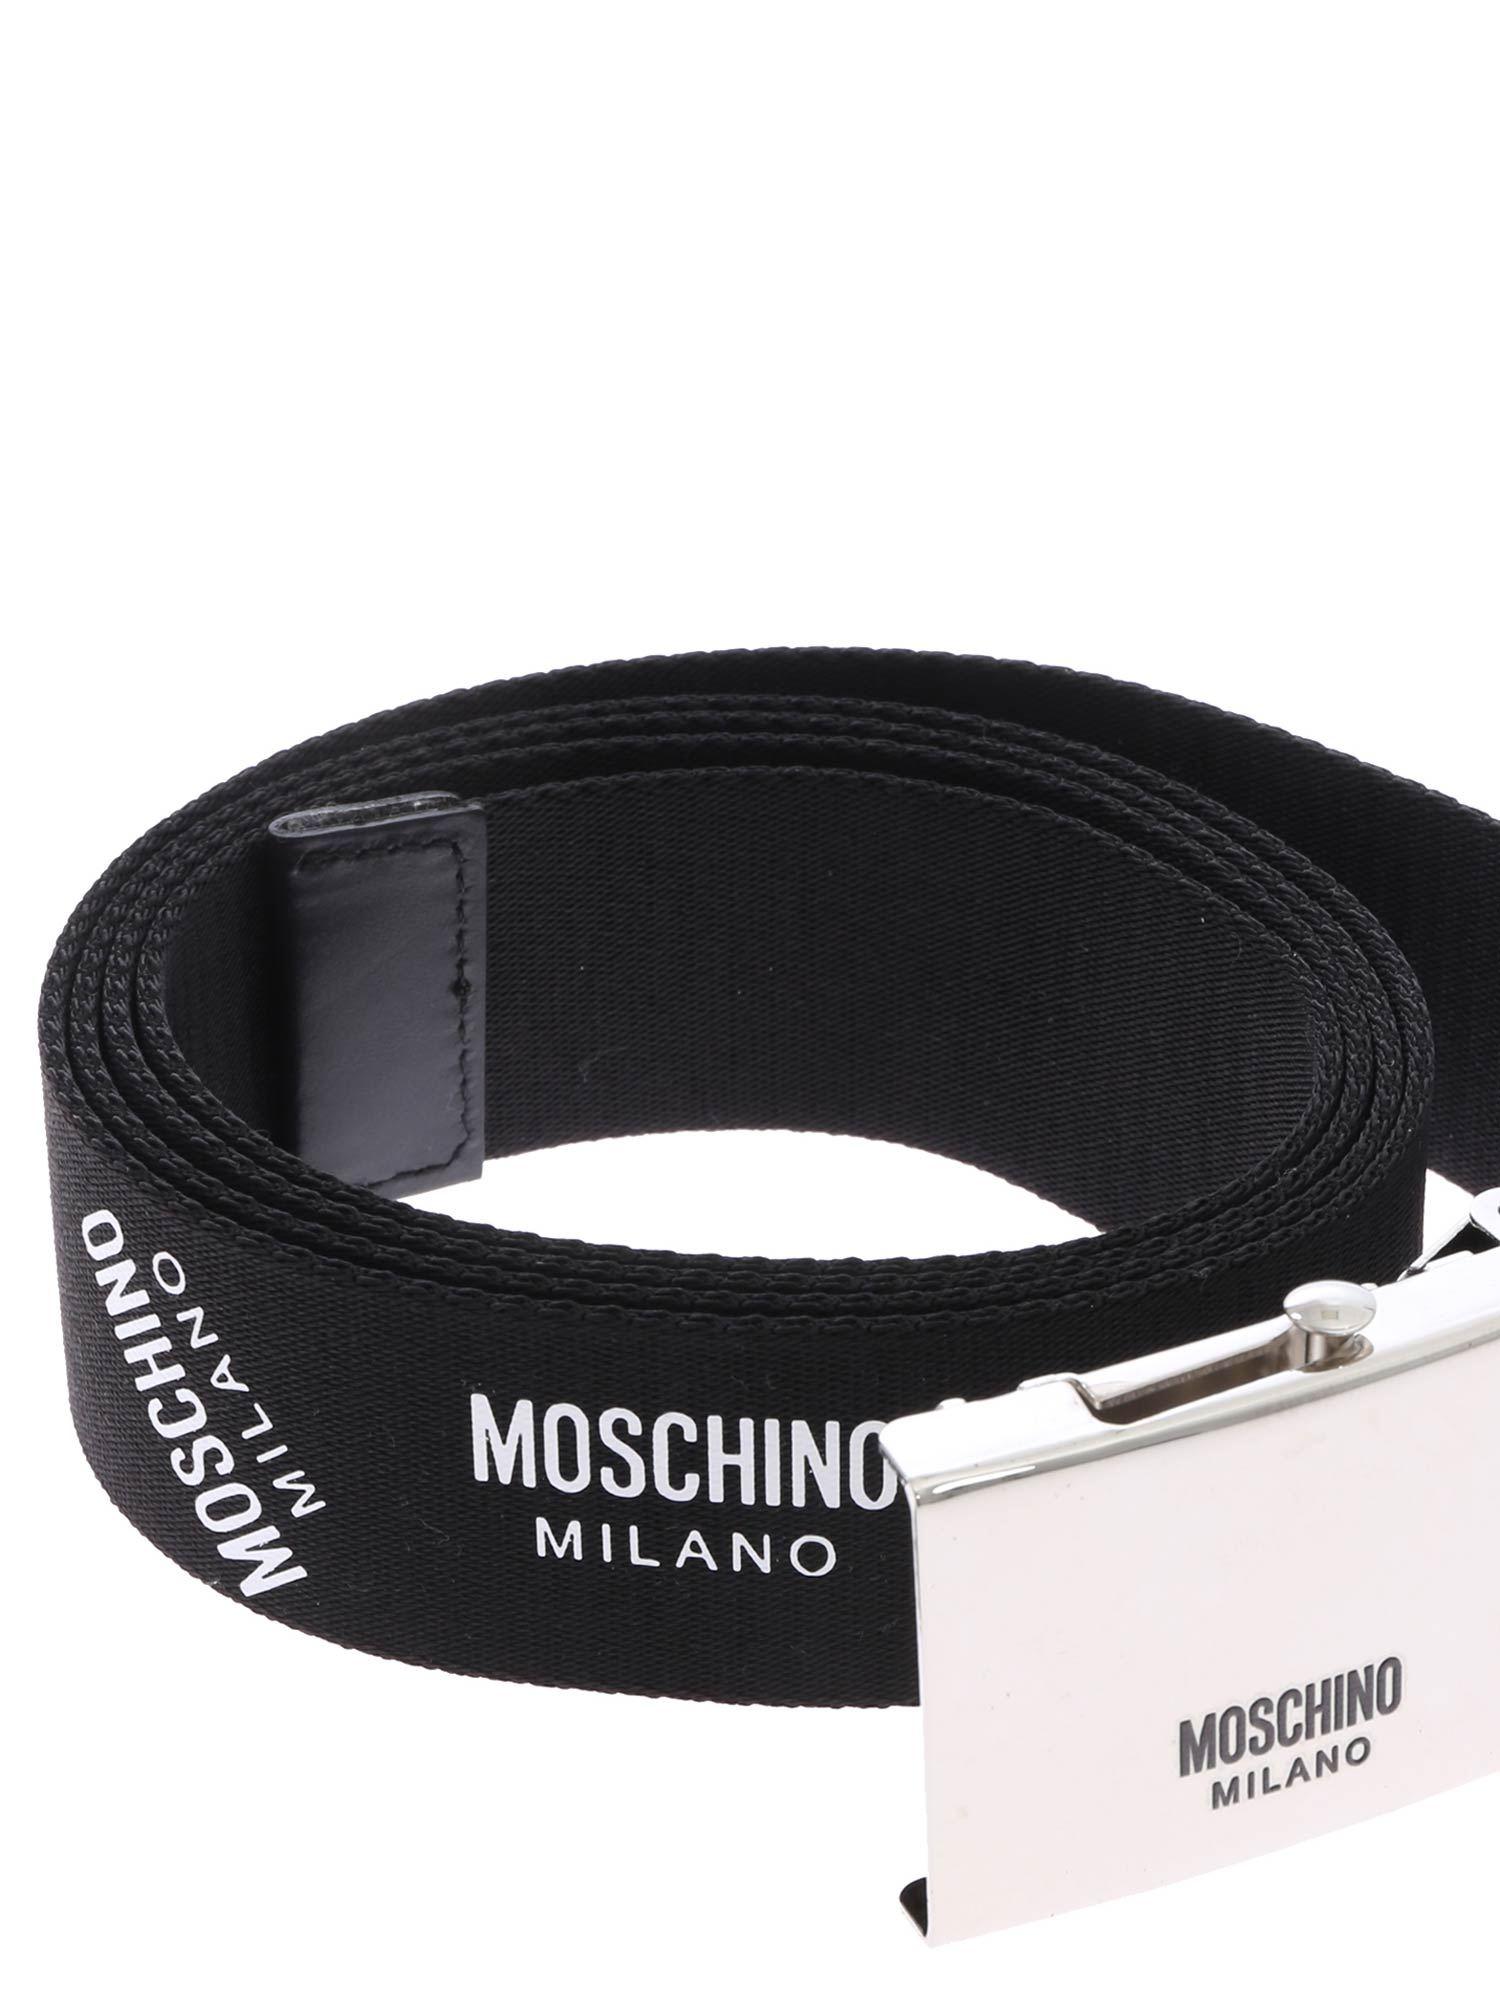 Moschino Leather Black Belt With Milano 